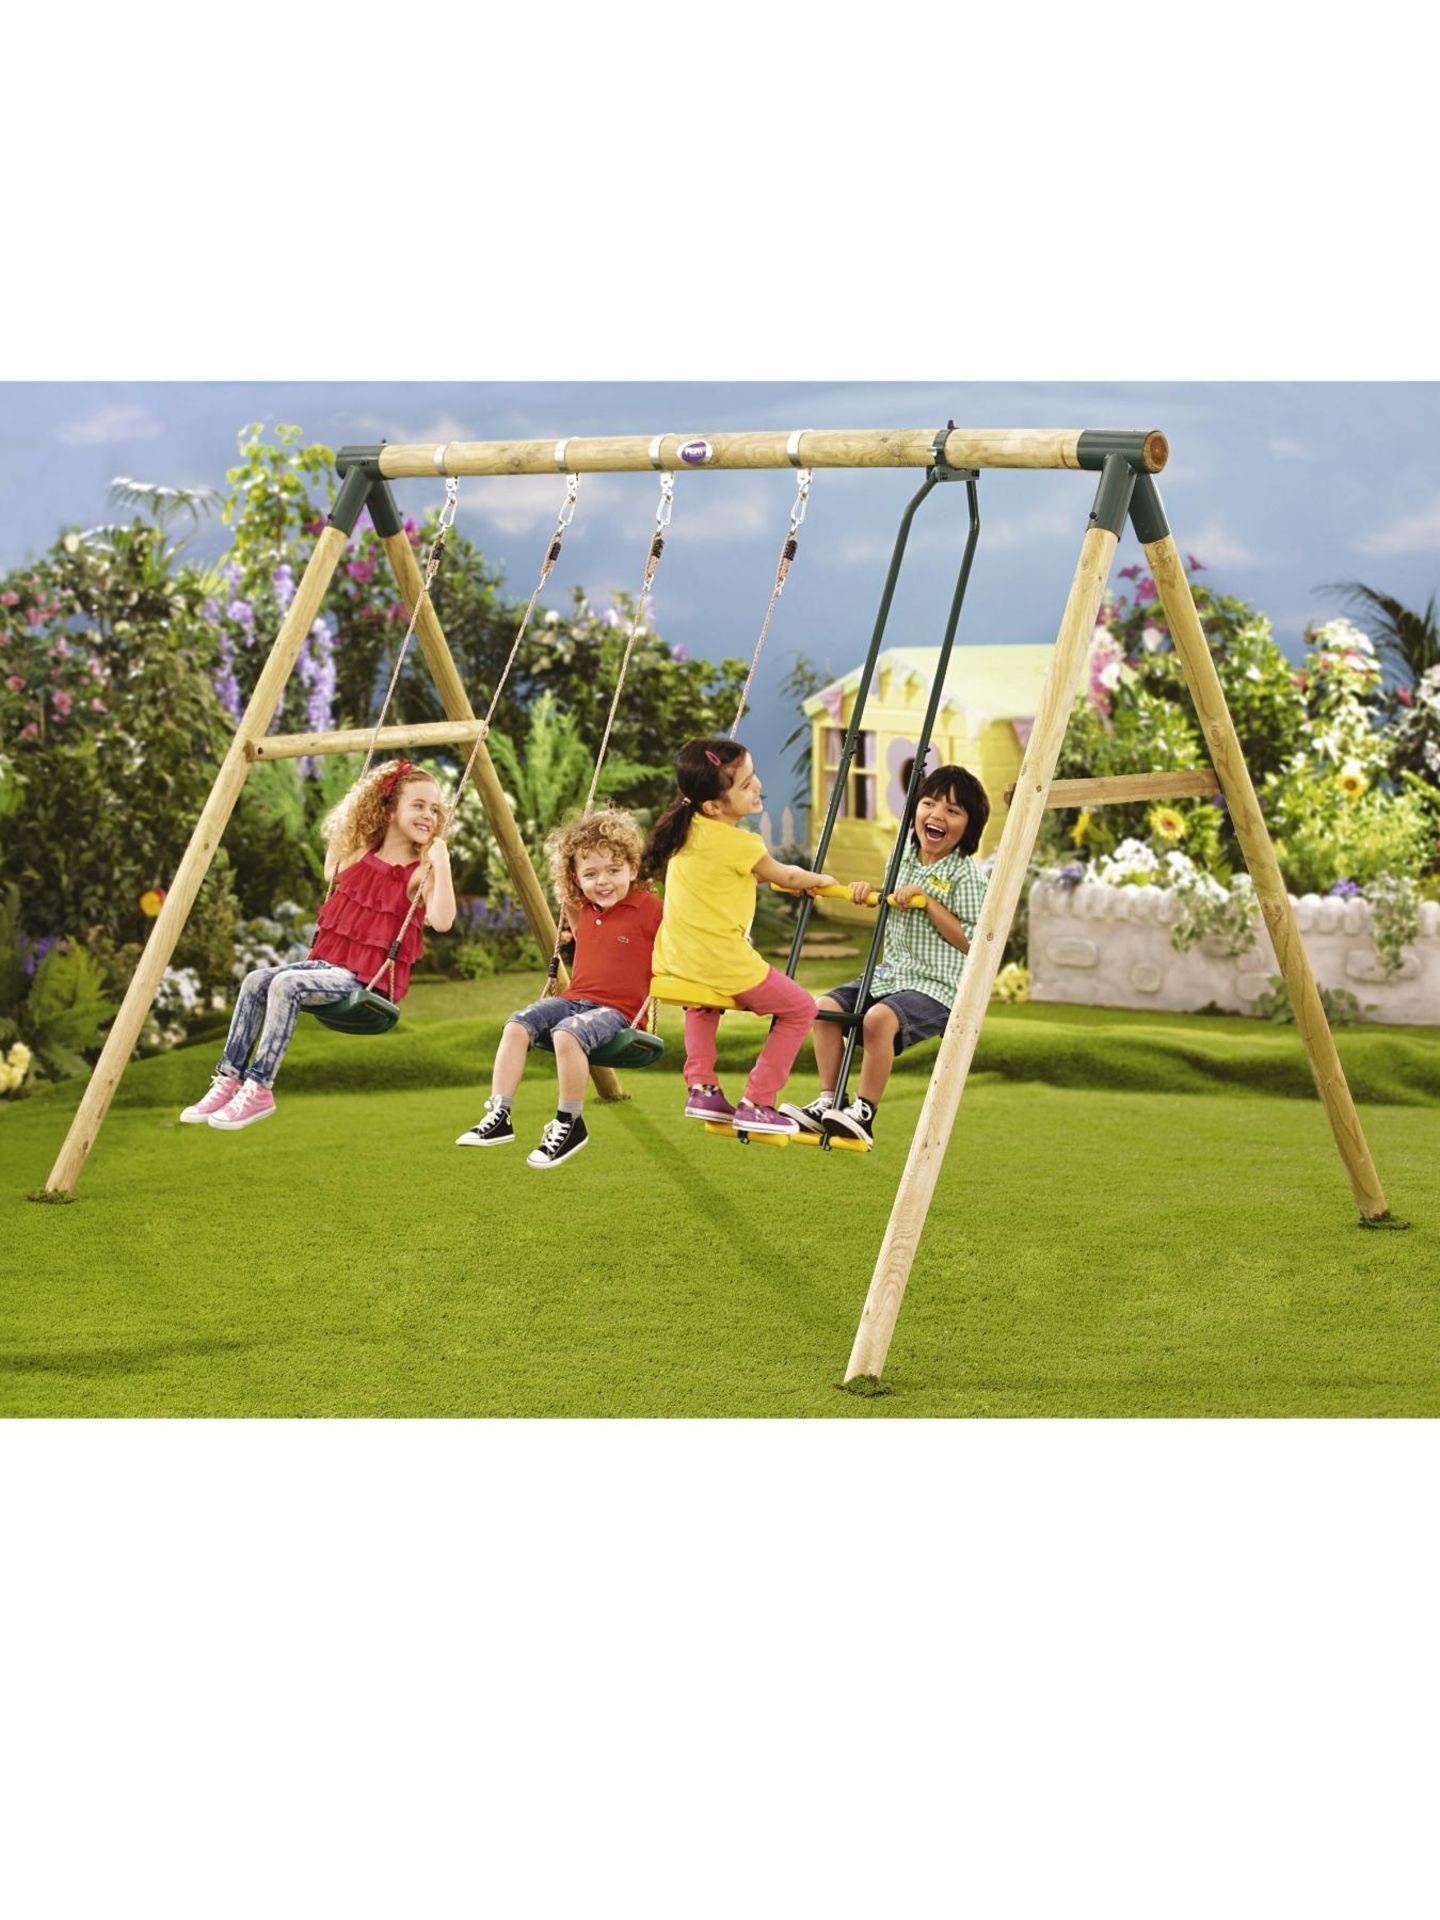 PALLET LOT 12 x Plum Double Swing with Glider Wooden Garden Swing Set. RRP £249.99 EACH. A - Image 2 of 3